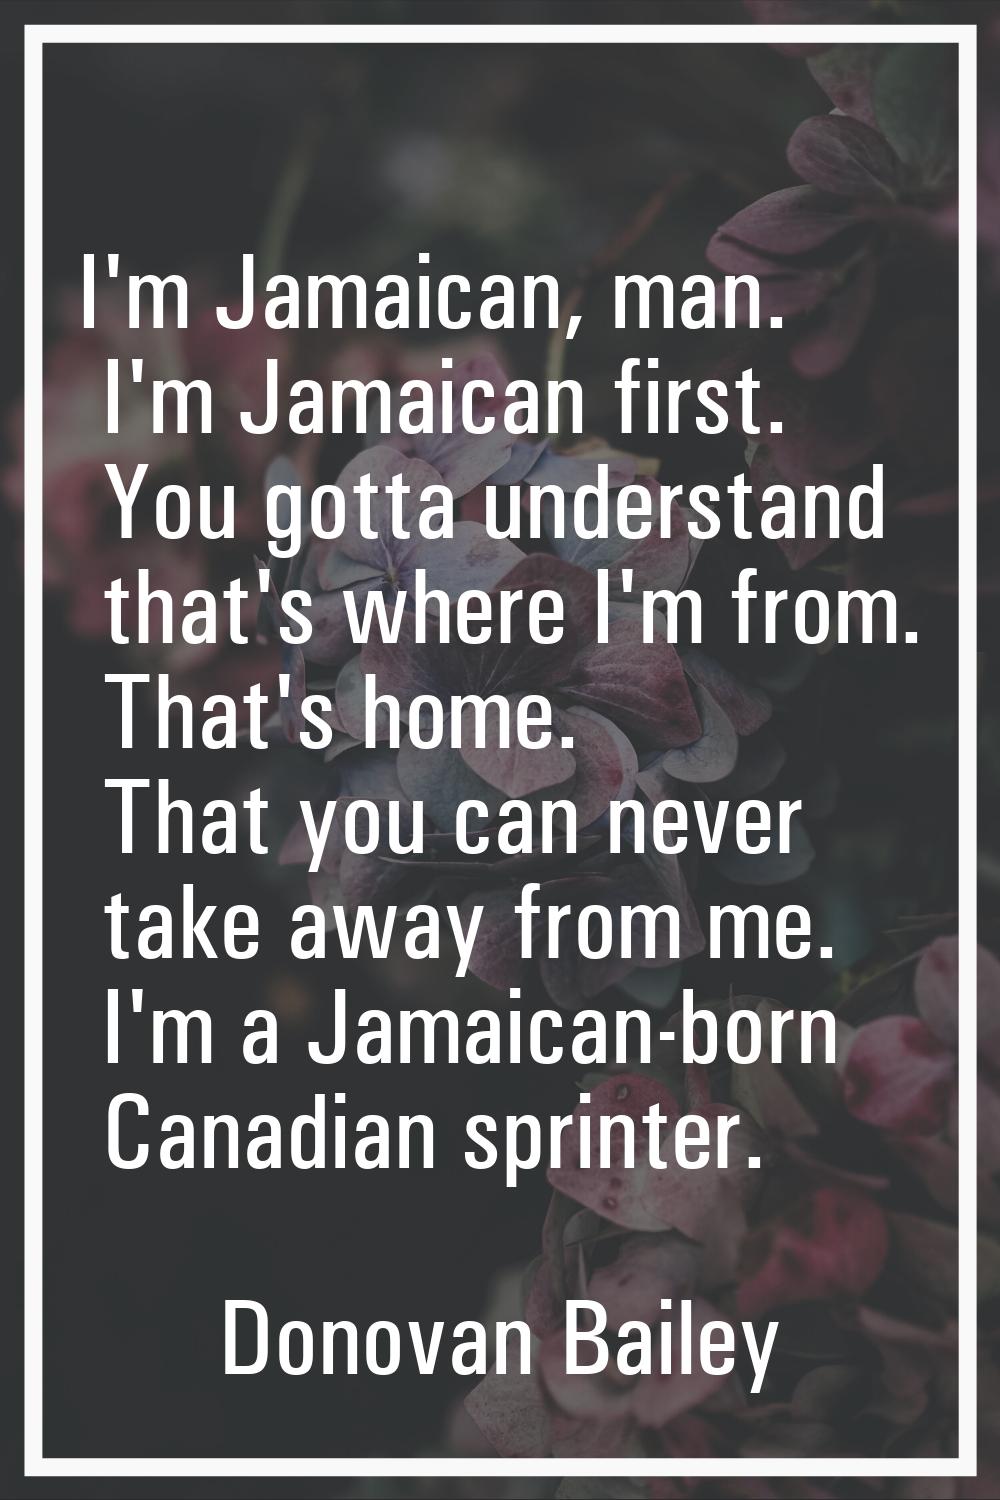 I'm Jamaican, man. I'm Jamaican first. You gotta understand that's where I'm from. That's home. Tha